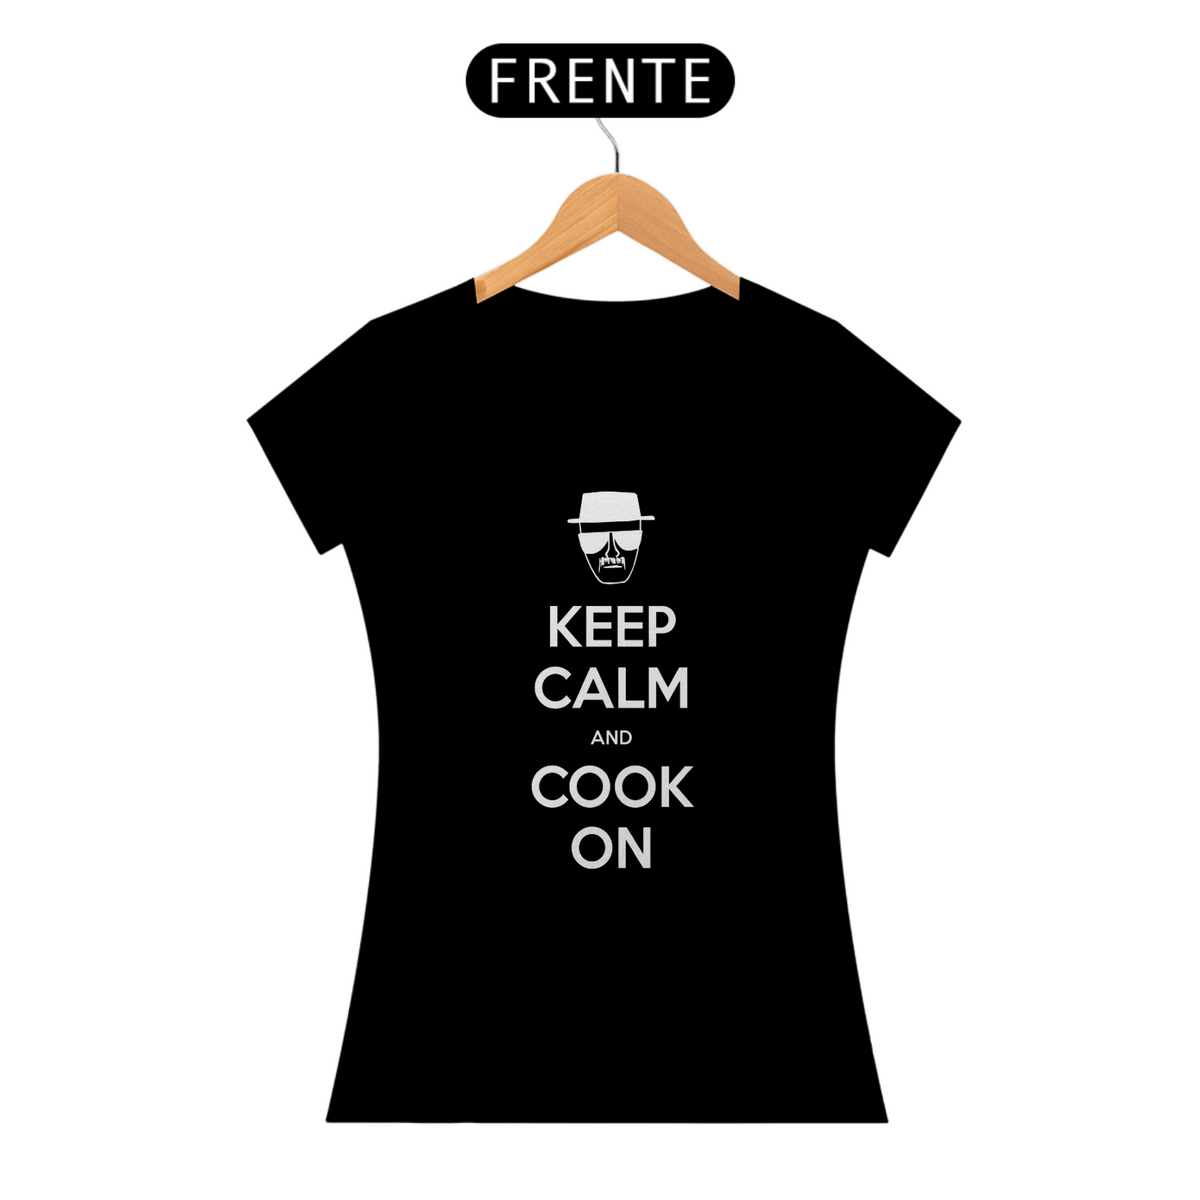 Nome do produto: Keep calm and cook on - Baby Look